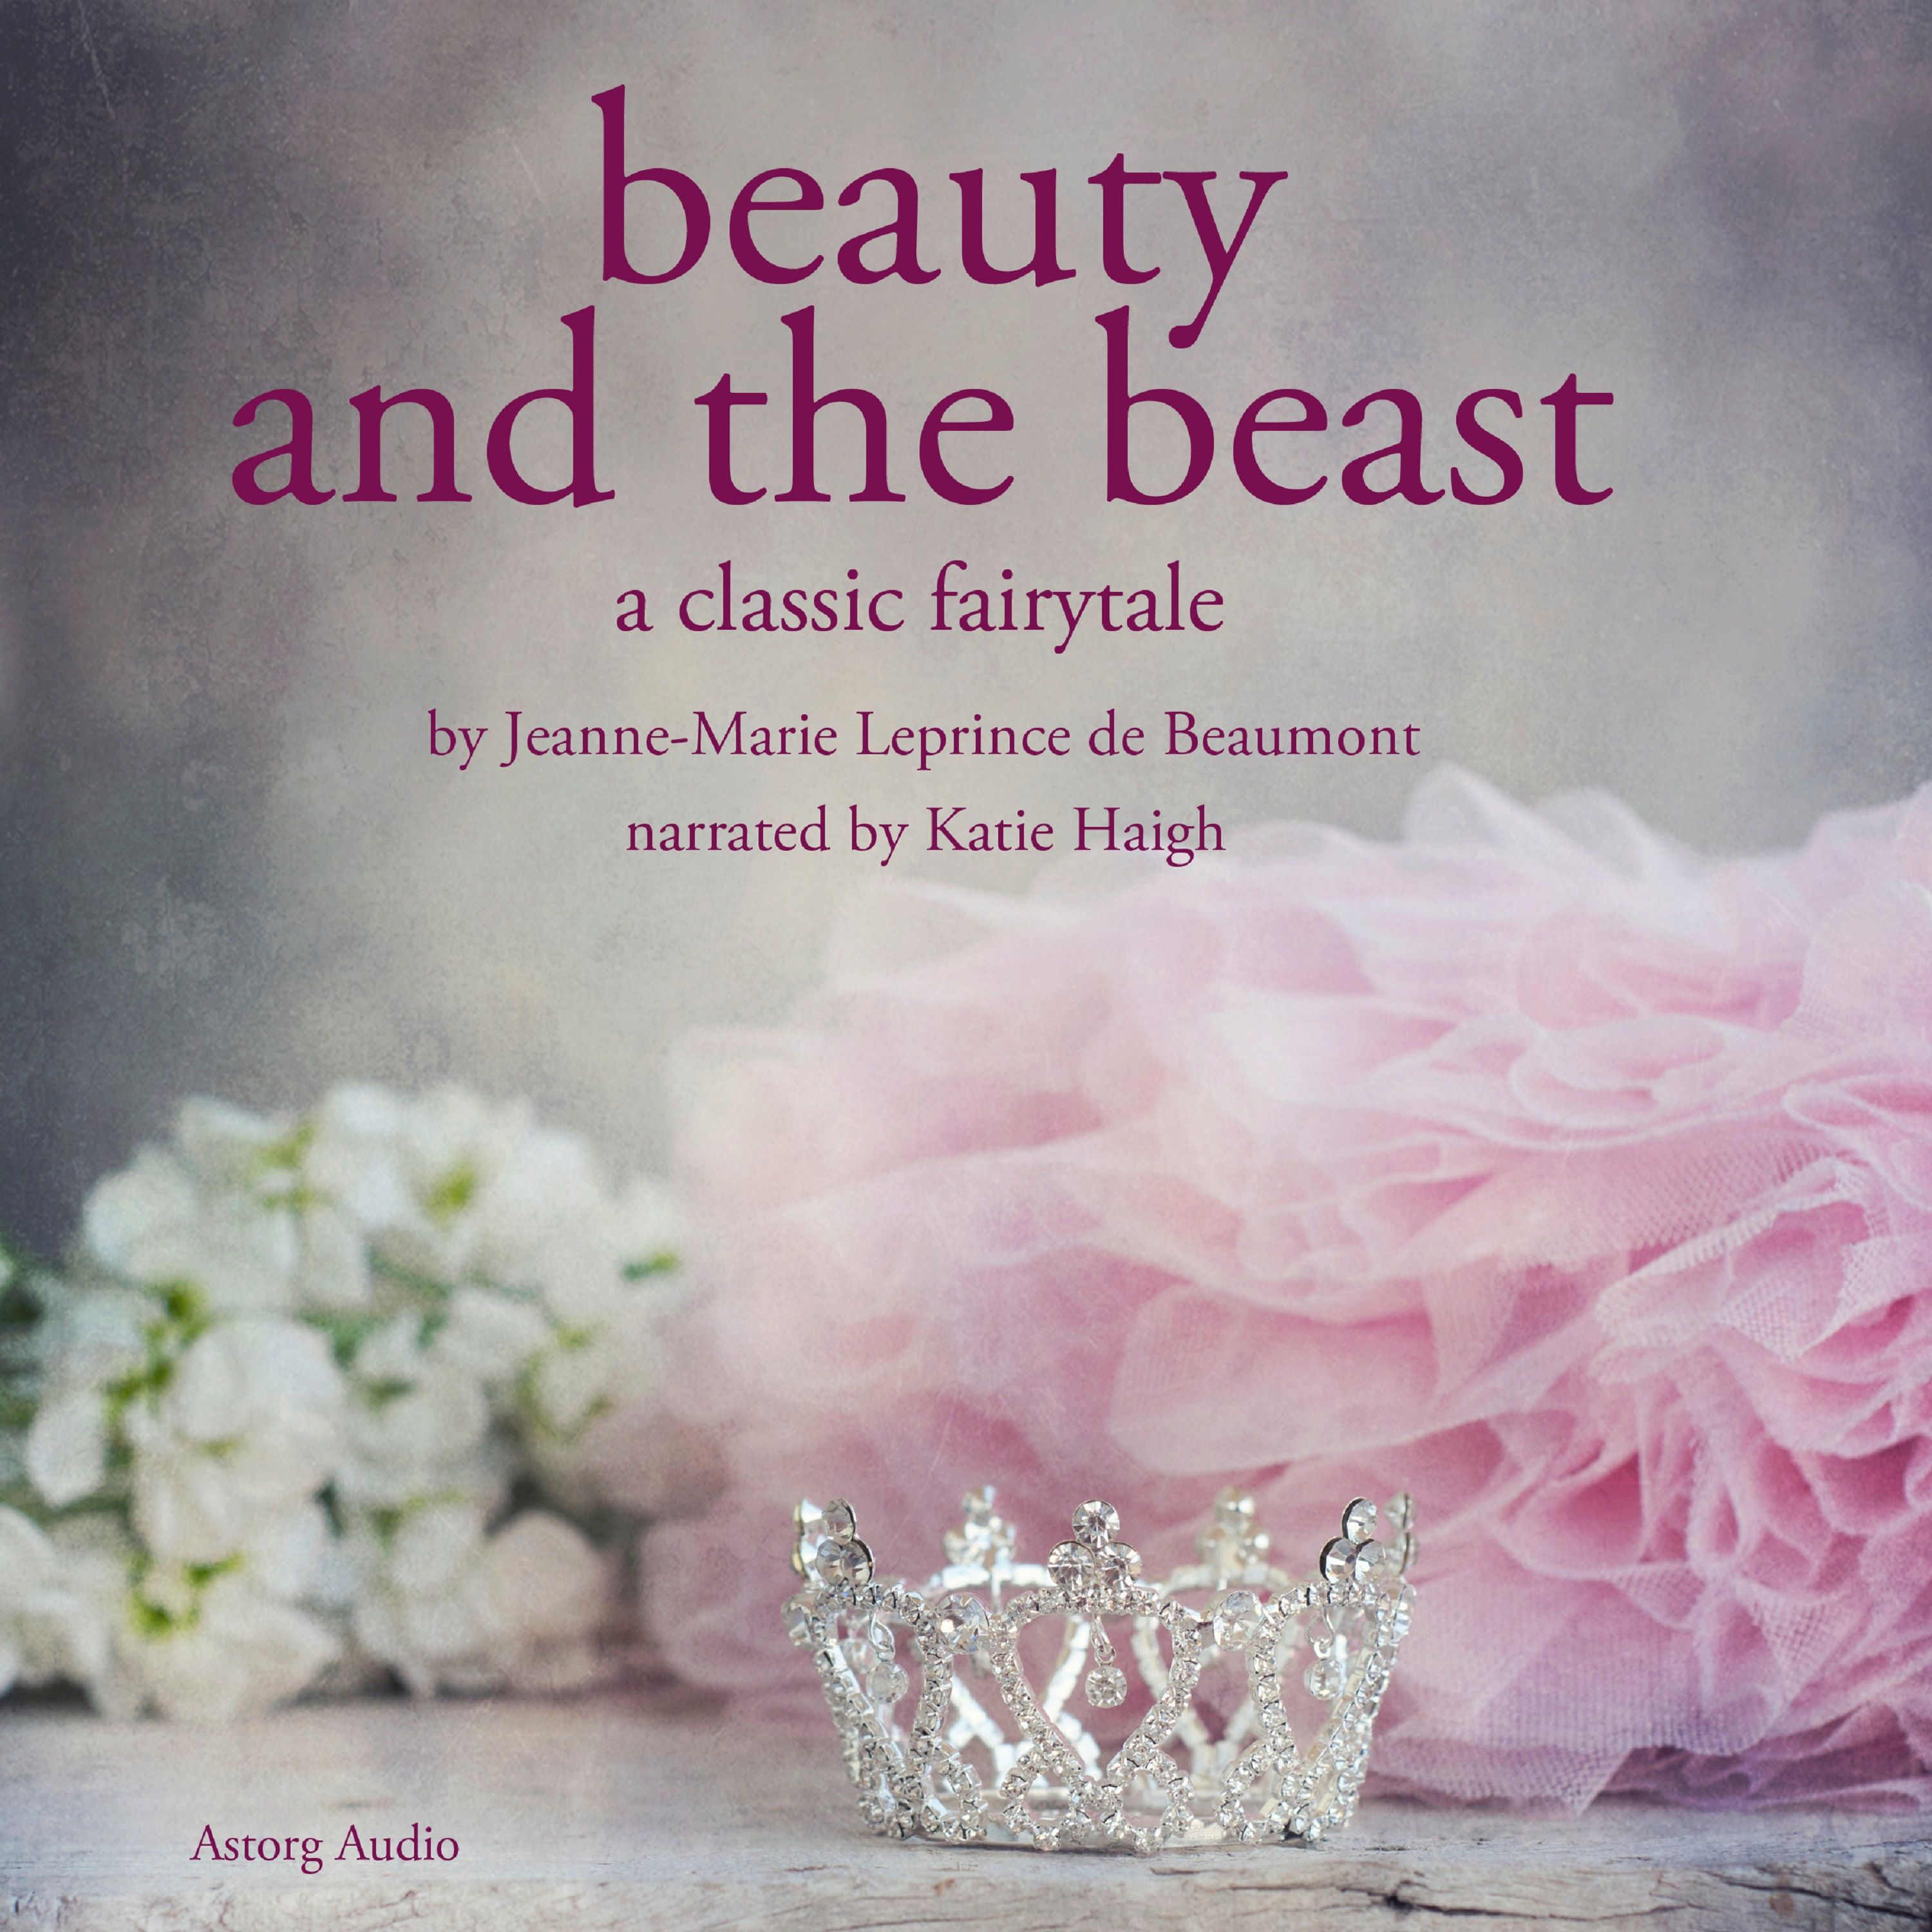 Beauty and the Beast, audiobook by Madame Leprince de Beaumont